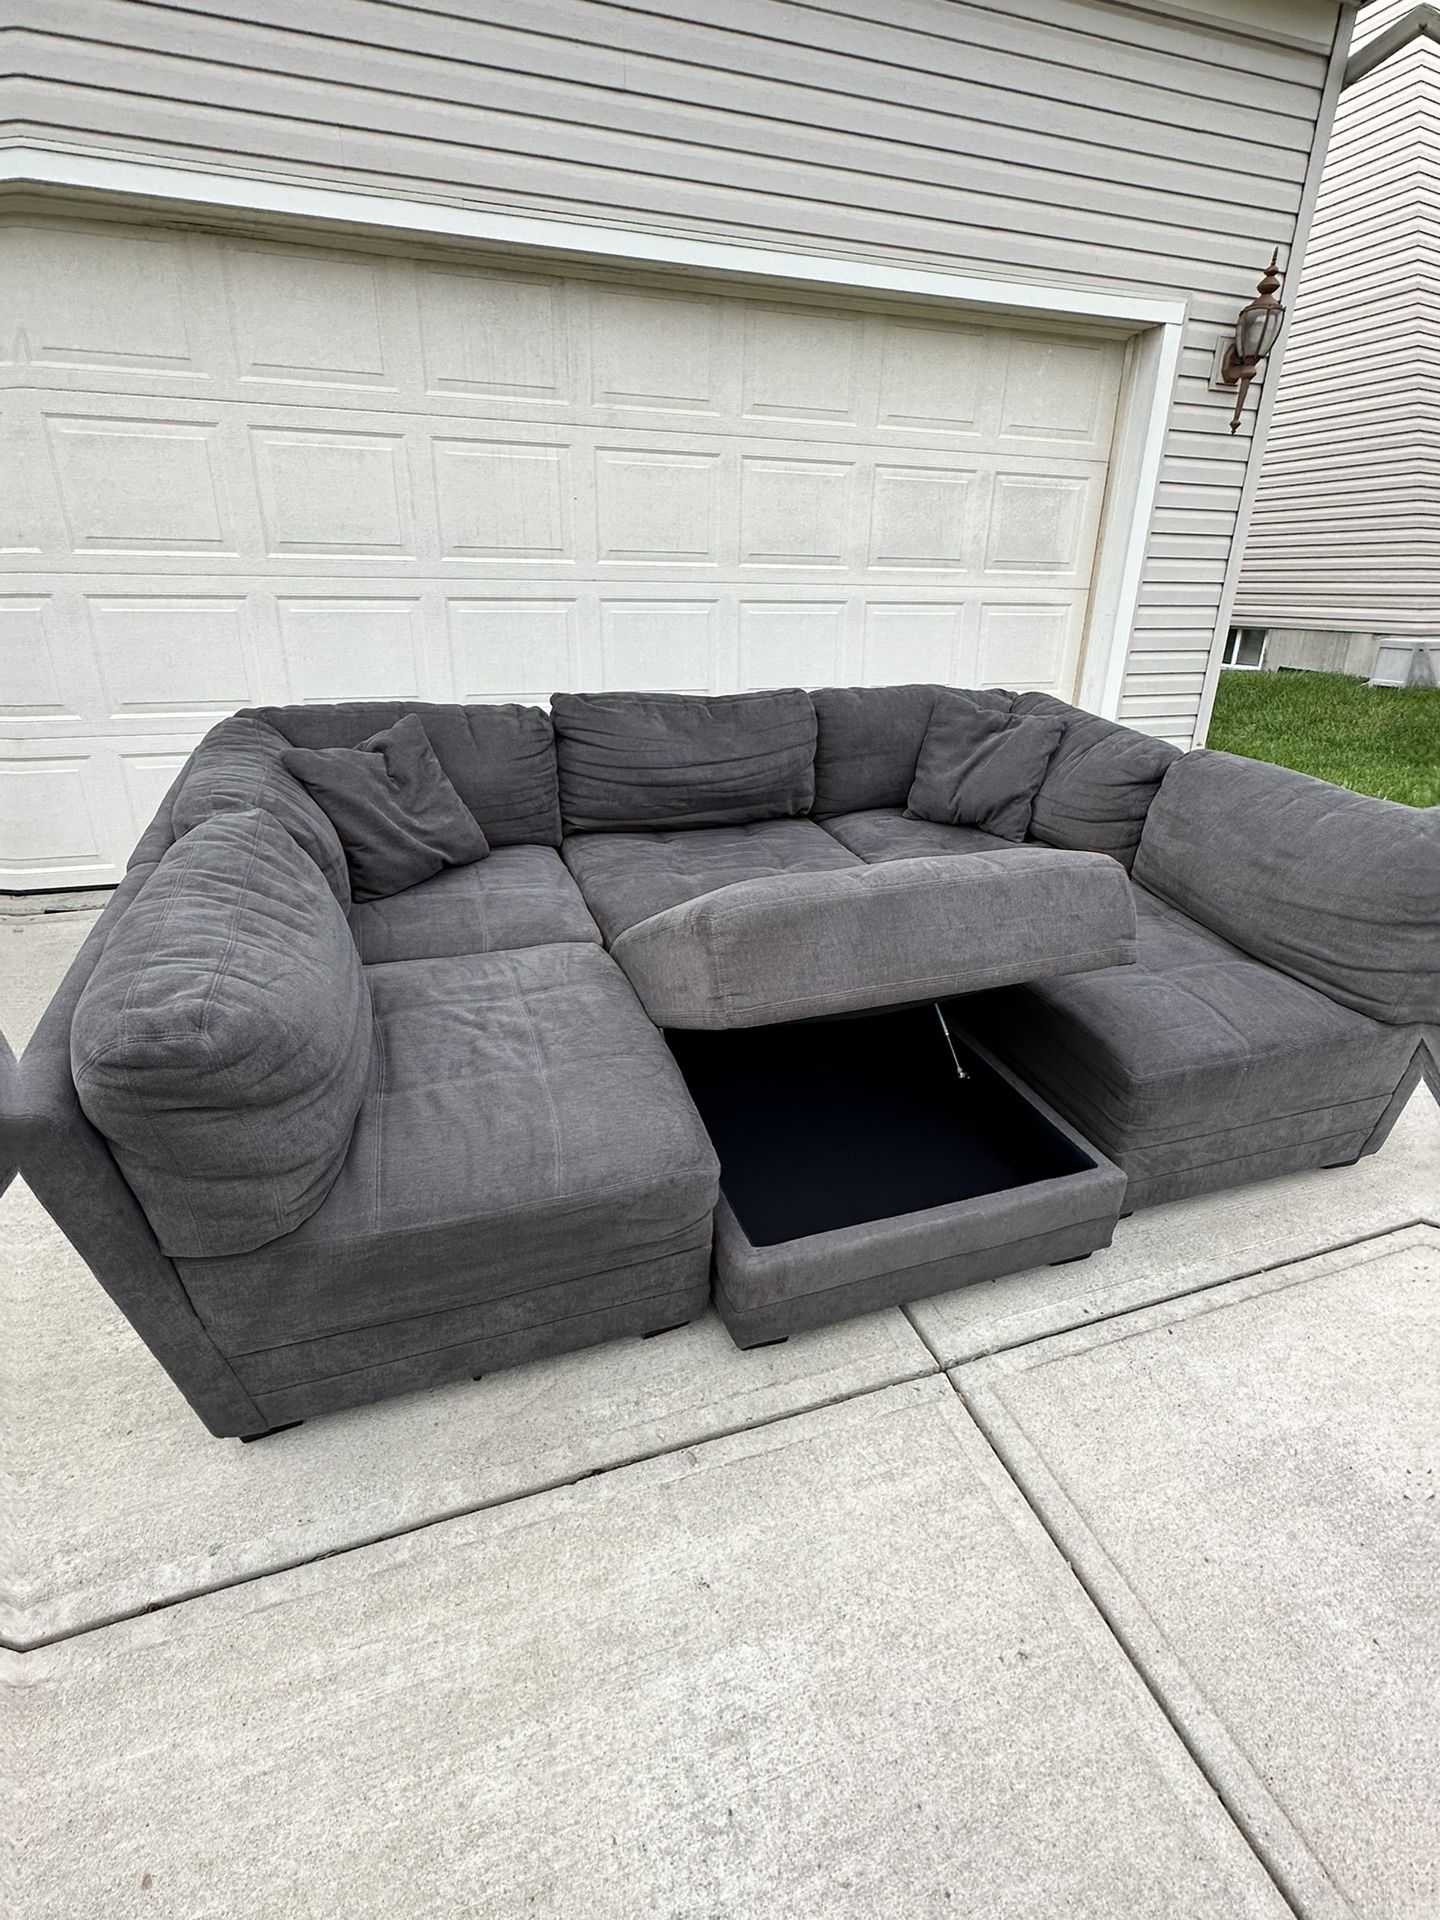 Modular Couch